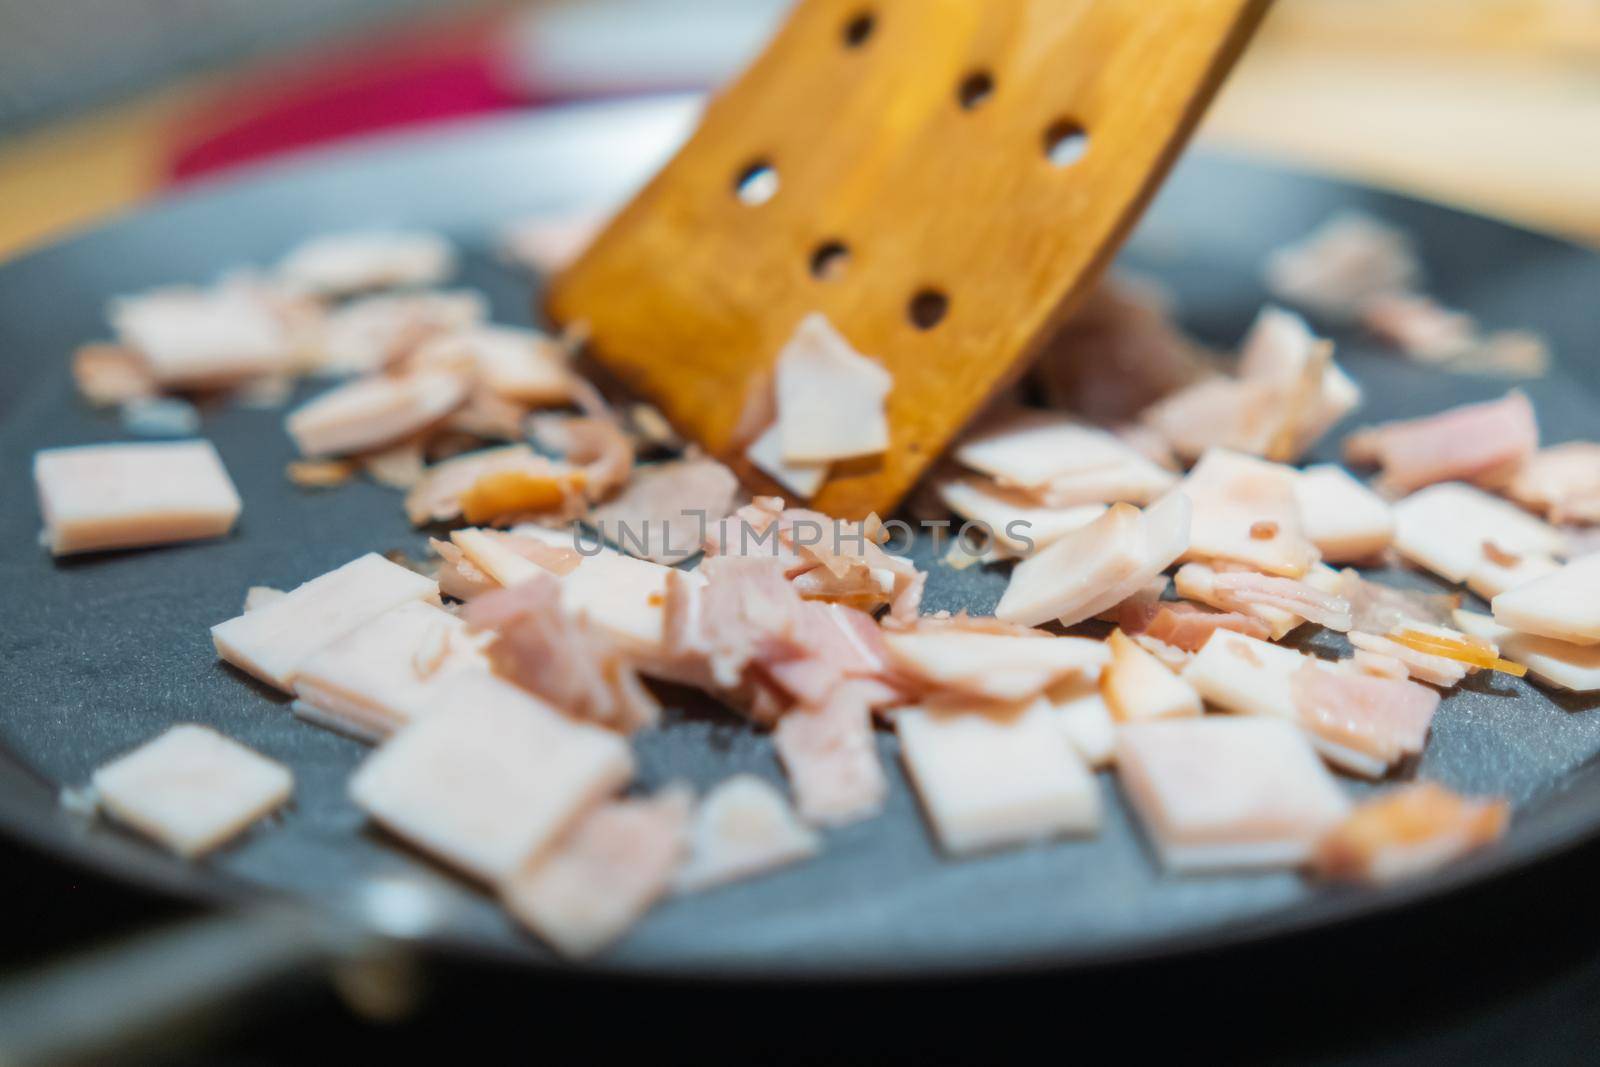 Close-up of wooden spoon moving chopped turkey ham above round griddle. Cooking thin turkey breast meat cut into squares on metal surface. Healthy meal preparation